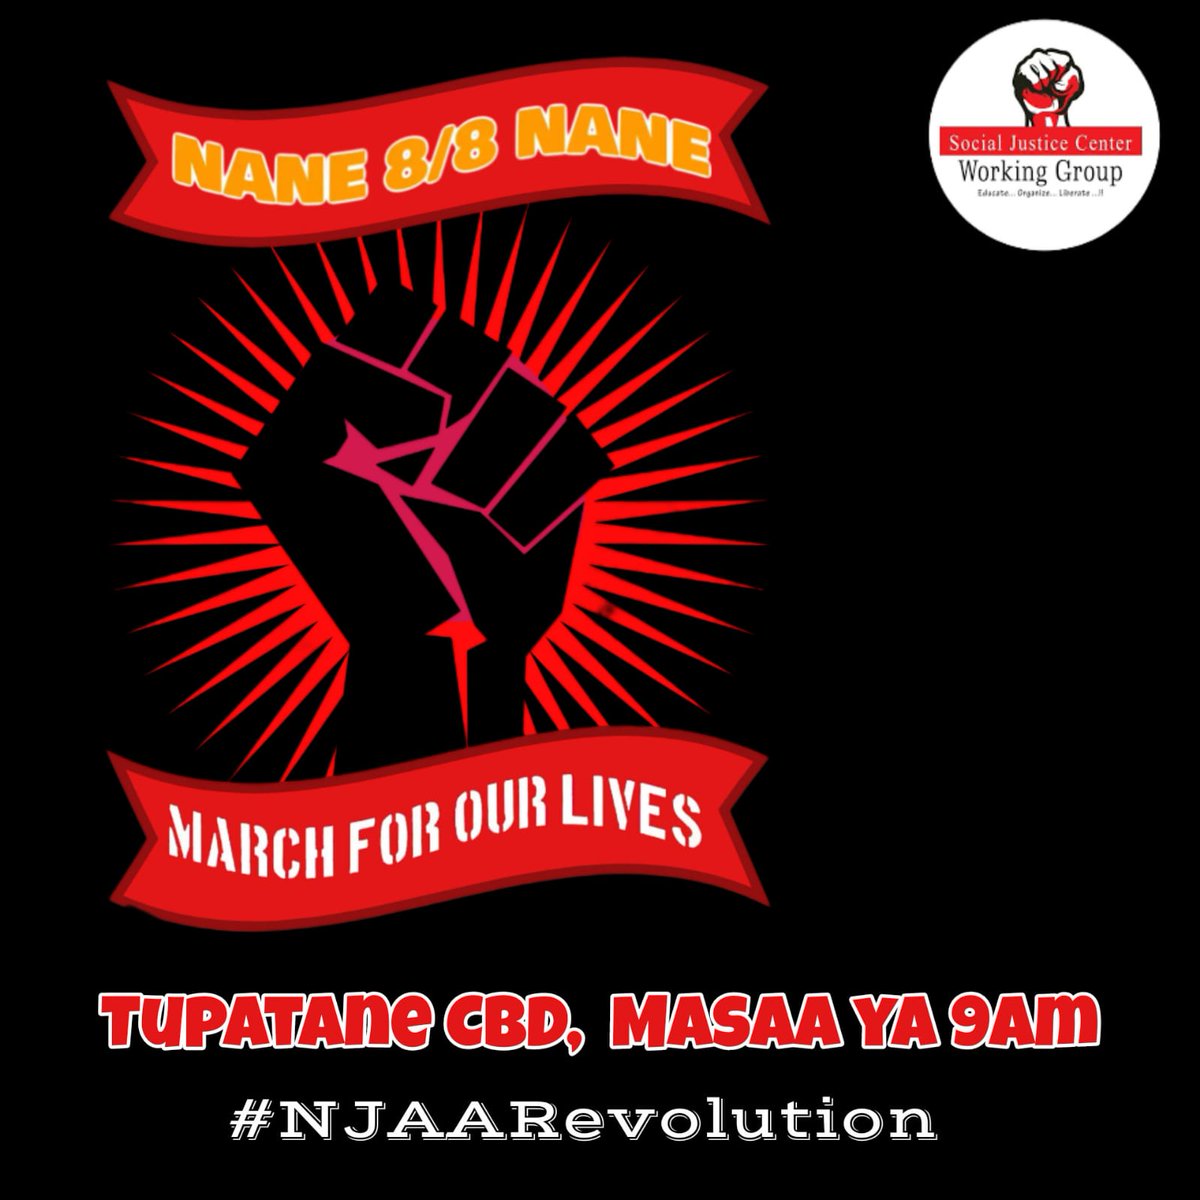 The police keep frustrating human rights defenders during our today's #NaneNaneMarchForOurLives in Nairobi CBD. The following are our arrested comrades #NjaaRevolution 1.Daniel Mala 2.Julius Kamau 3. Ibrahim ombati 4. Happy Olal 5. Andrew Okola 6. Dennis Mbogo 7.Said Athuman